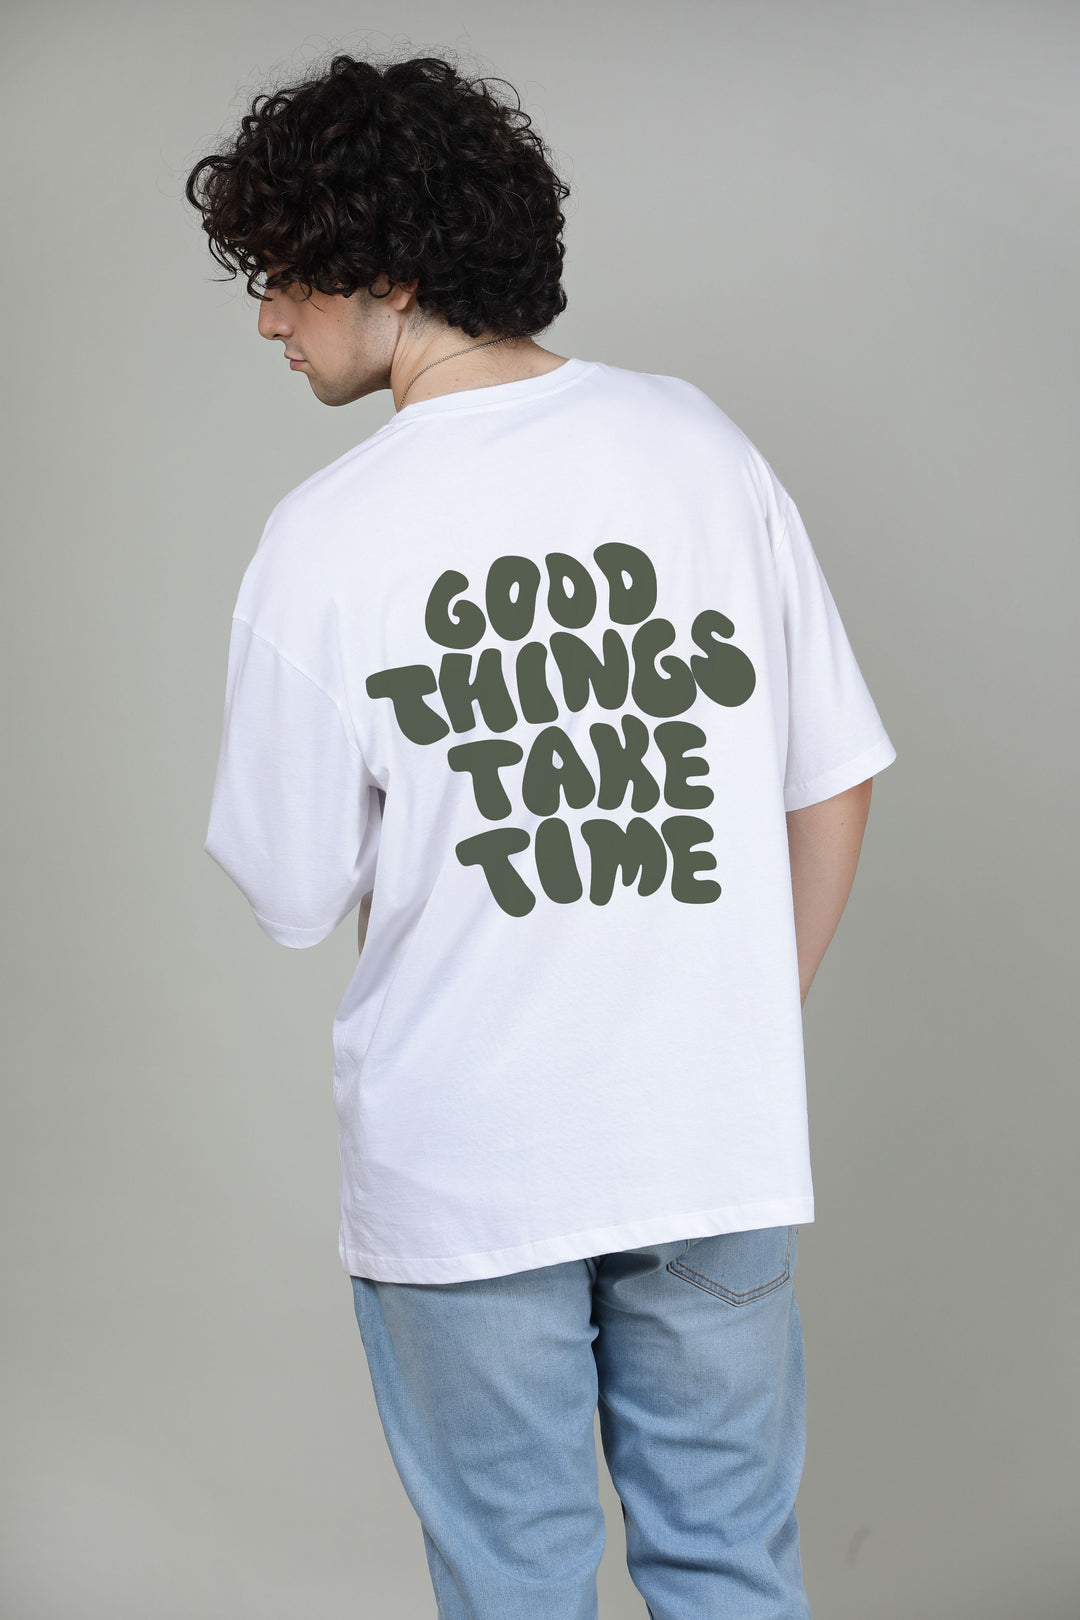 Gud things takes time- Printed Oversized Tees